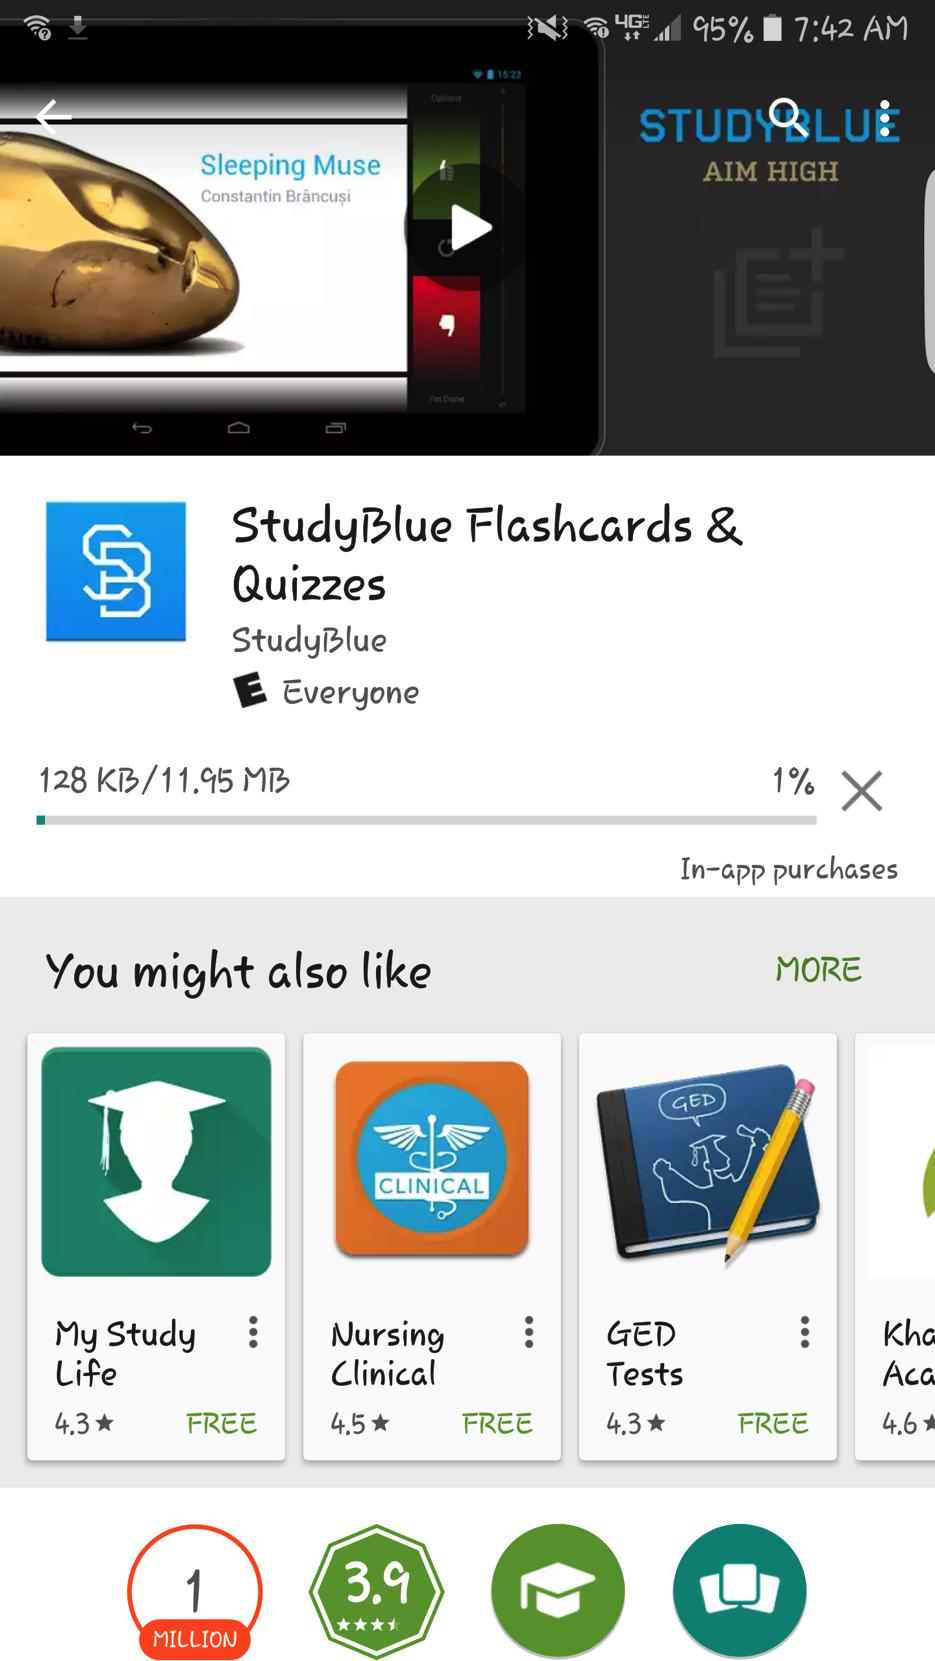 Studyblue on Phone Just a reminder that you can access anything I will be showing you on your smartphone or tablet.